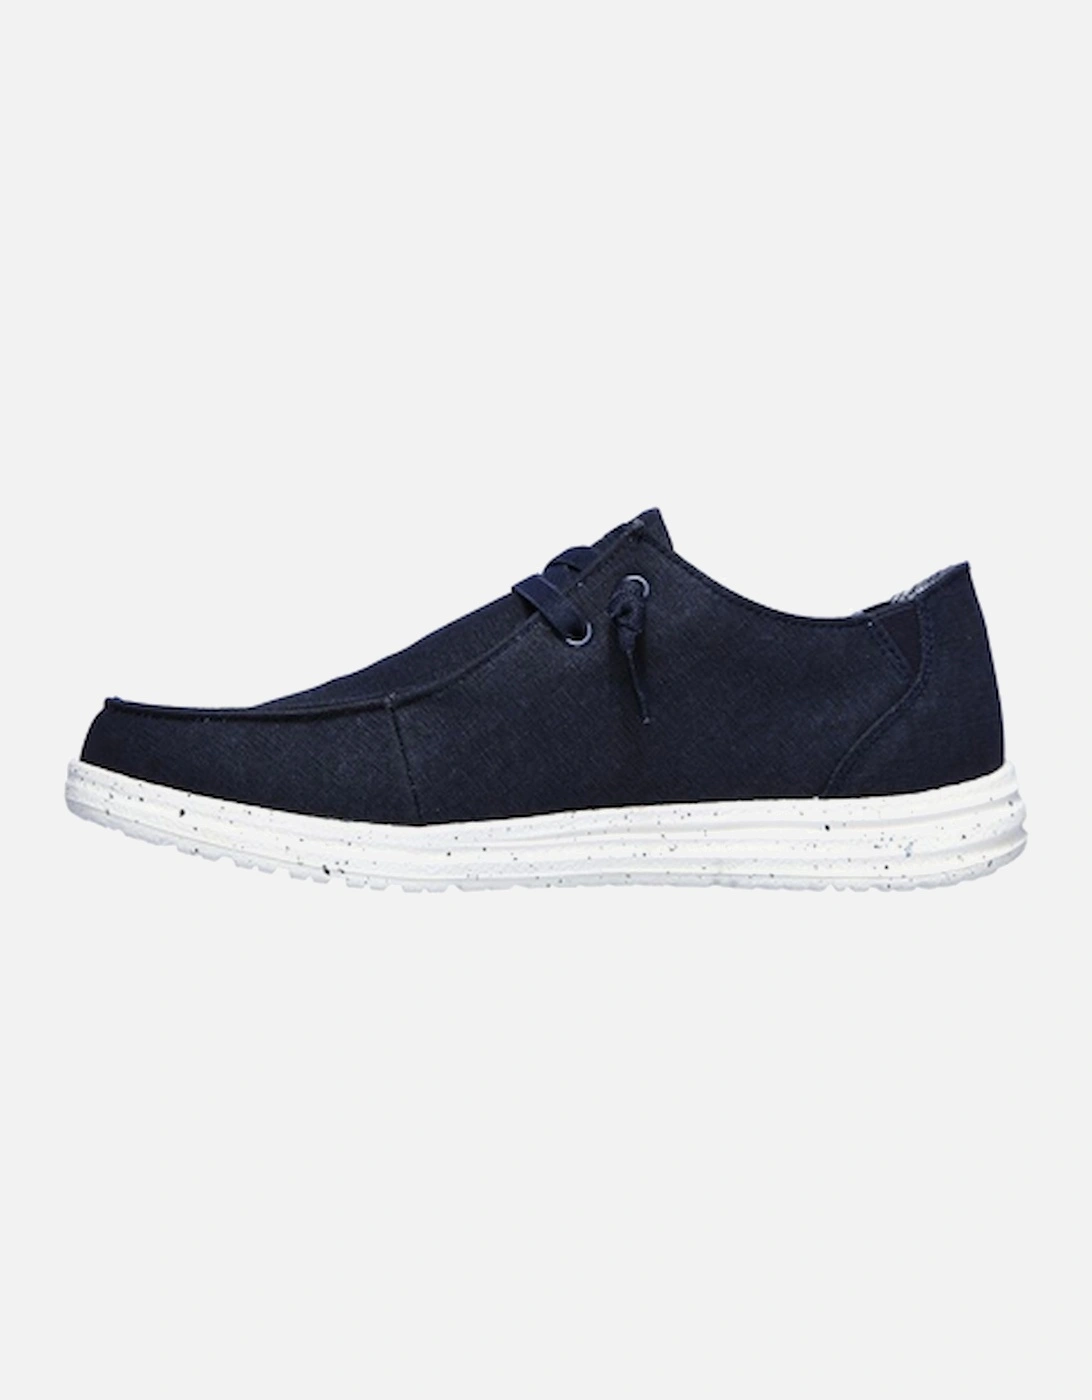 Men's Relaxed Fit Melson Chad Slip On Navy